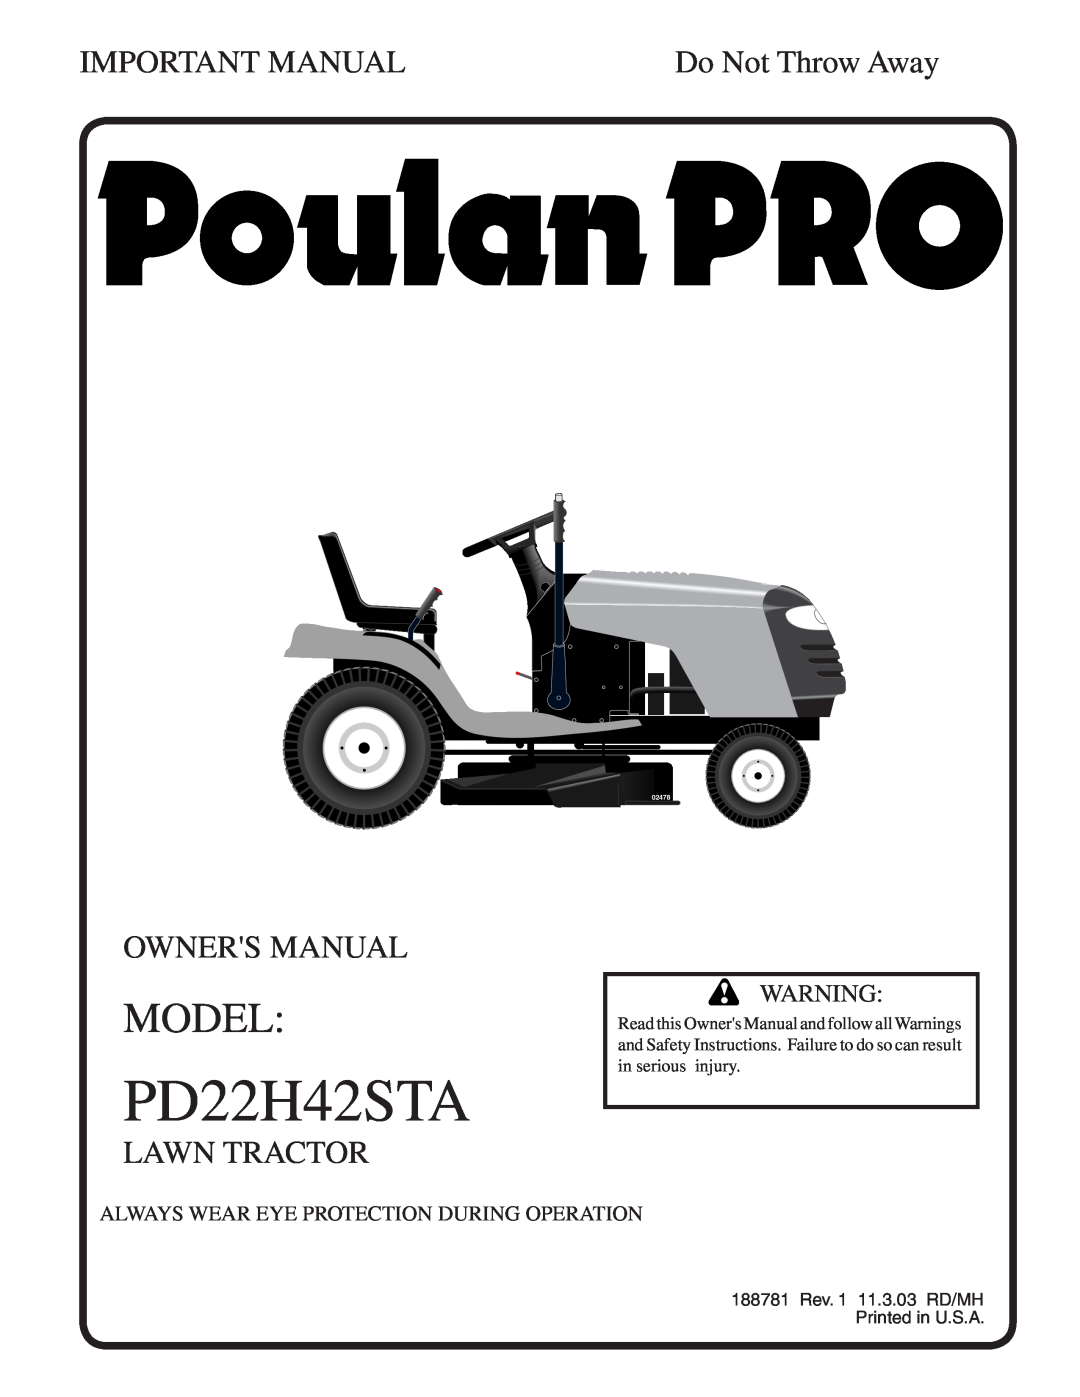 Poulan 188781 owner manual Model, PD22H42STA, Important Manual, Lawn Tractor, Do Not Throw Away, 02478 